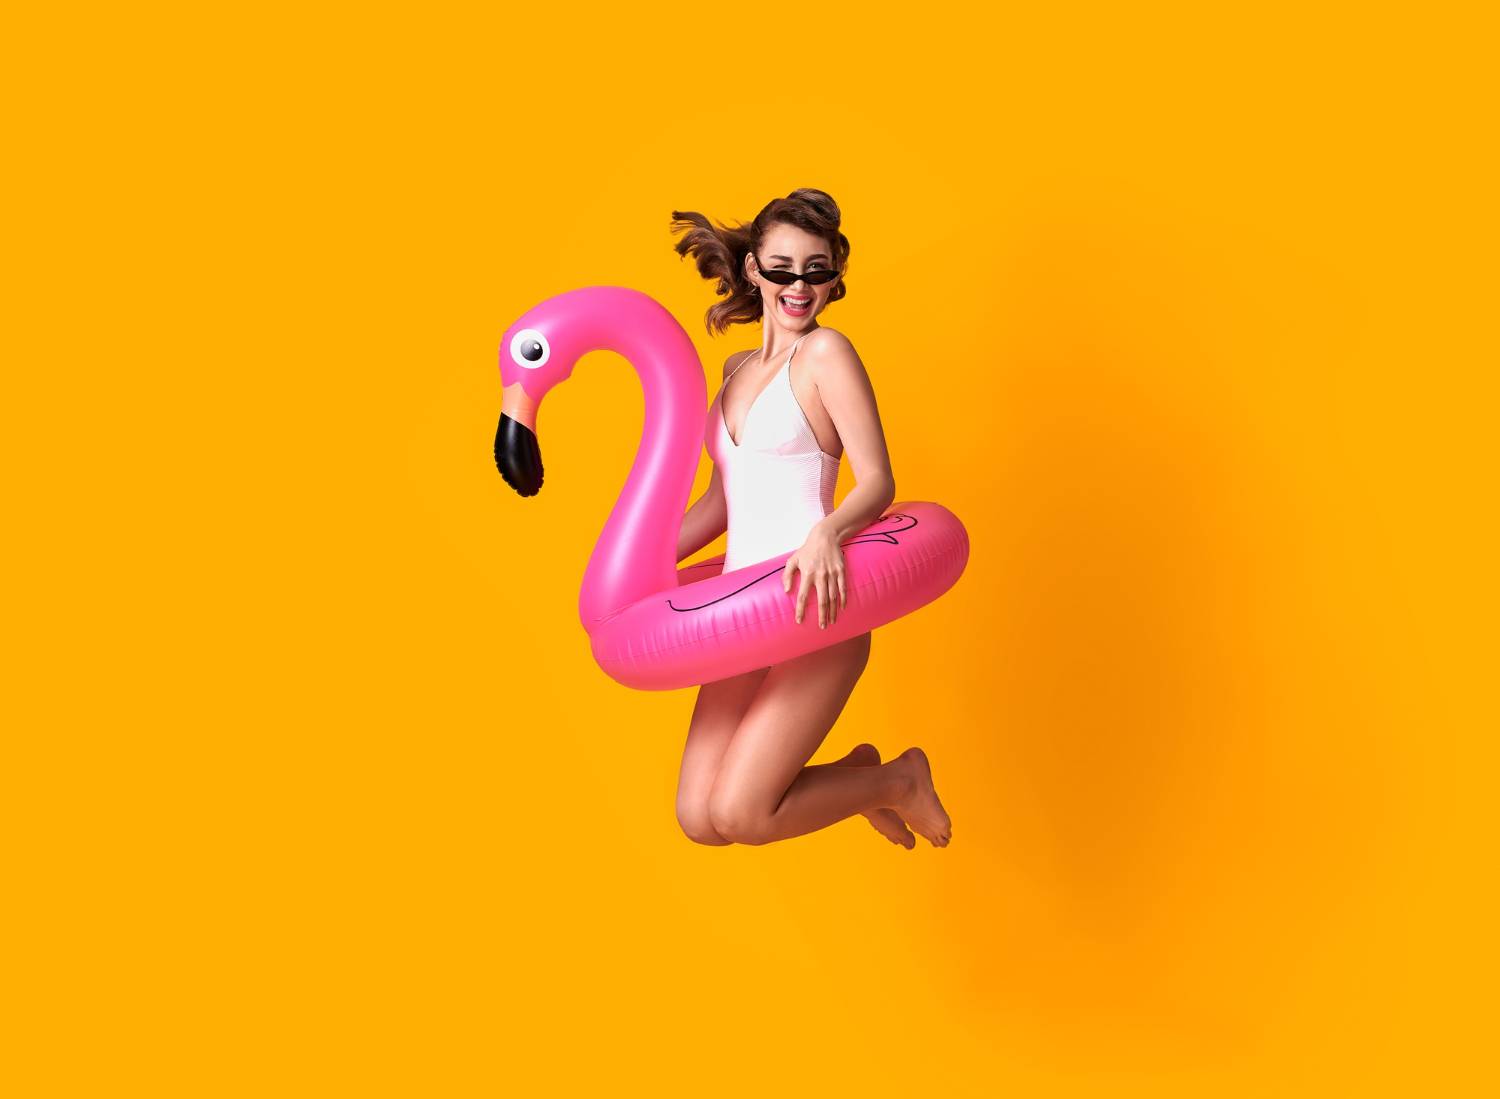 Woman with sunglasses jumping joyfully with a pink flamingo float on a yellow background.